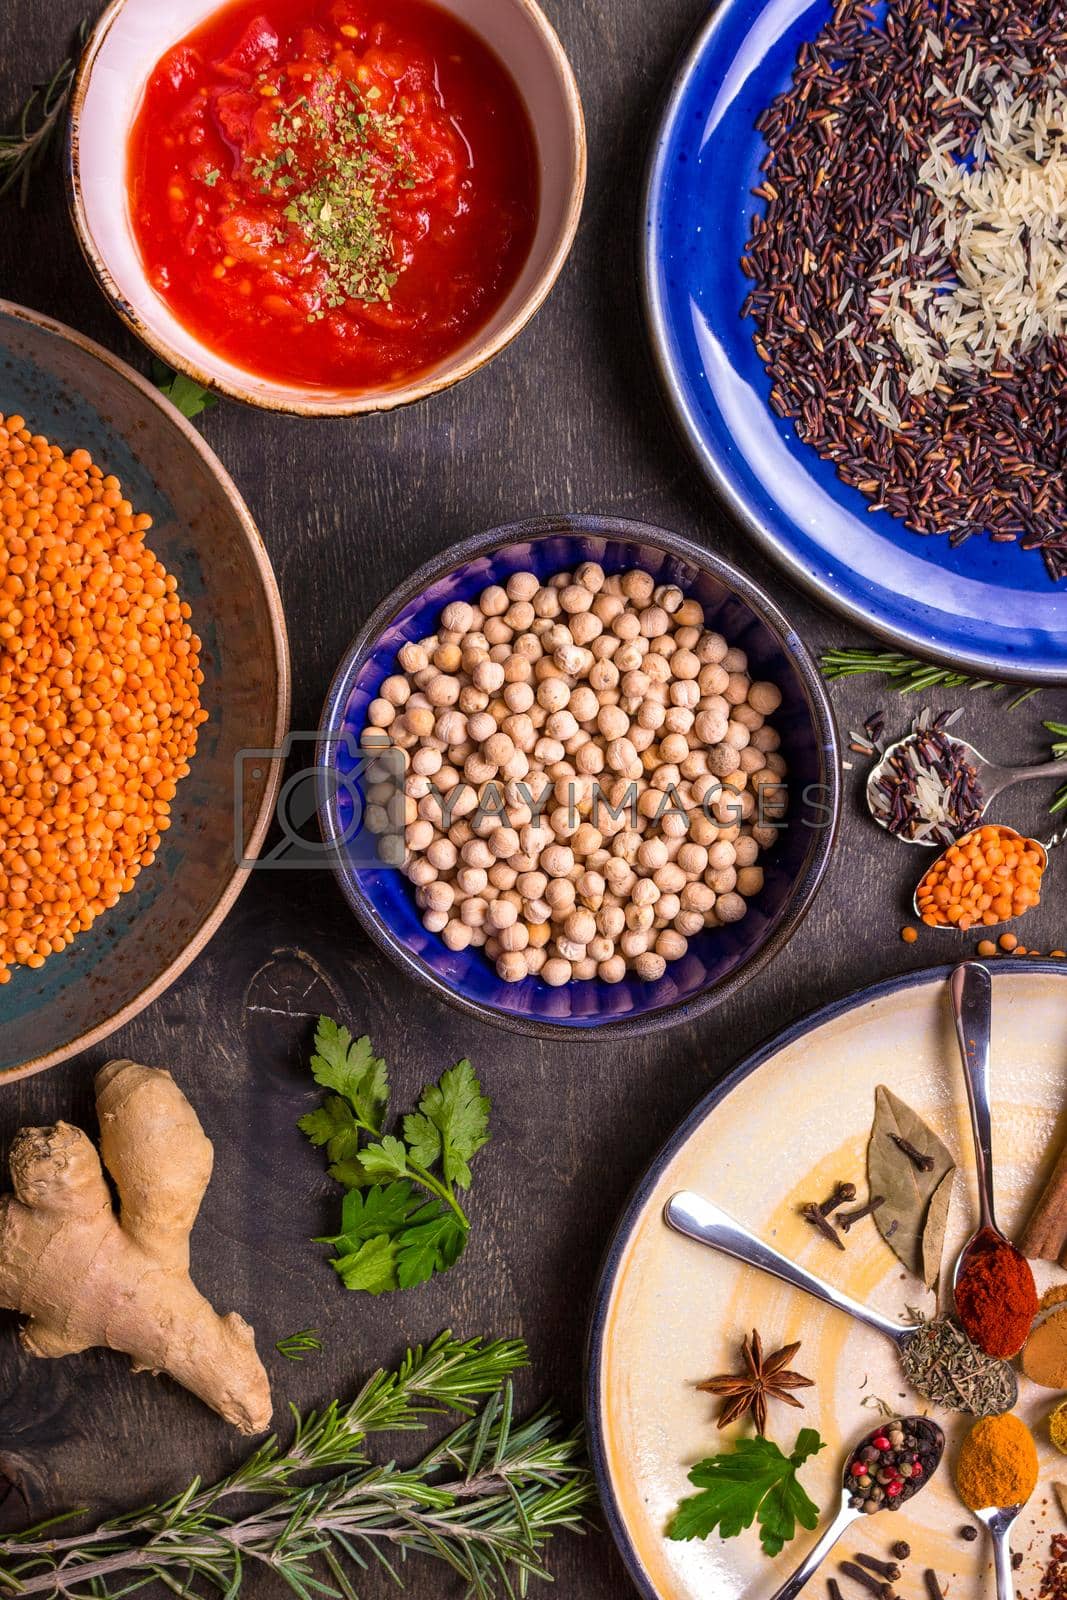 Royalty free image of Ingredients for indian or eastern cuisine by its_al_dente